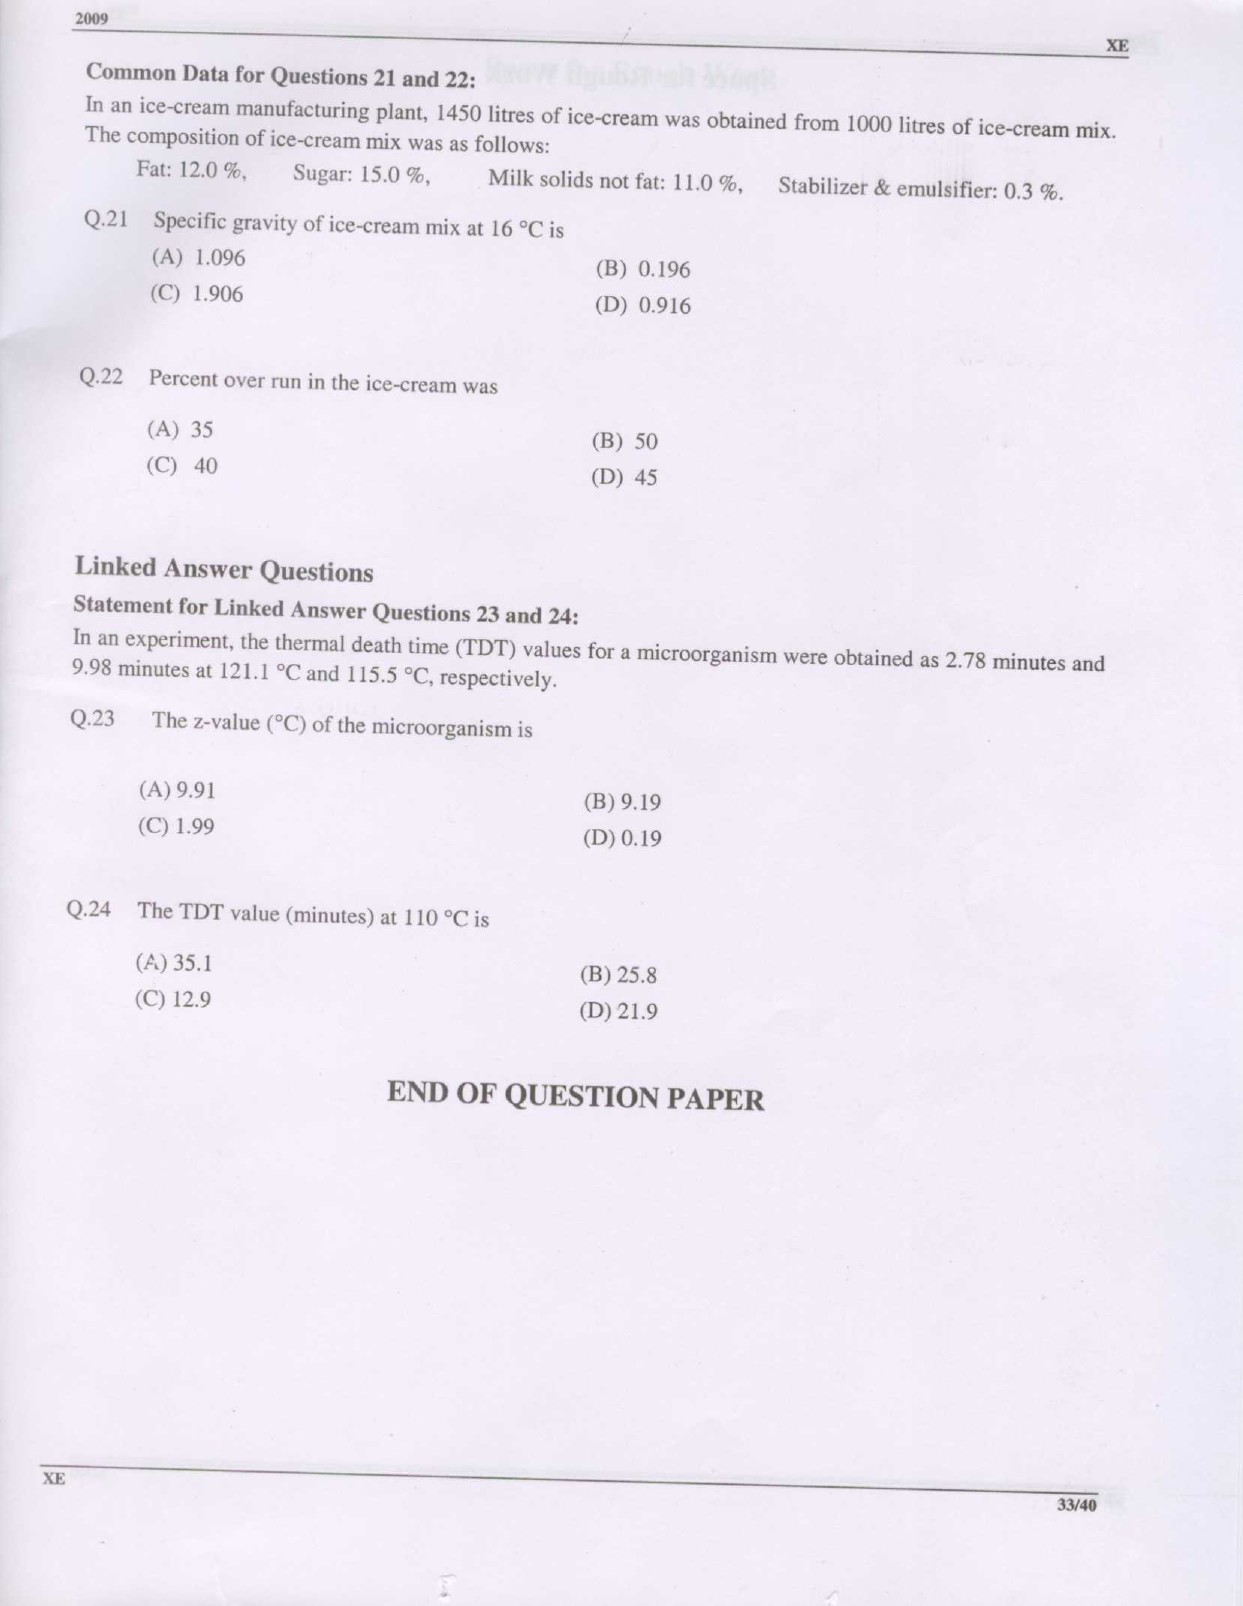 GATE Exam Question Paper 2009 Engineering Sciences 33